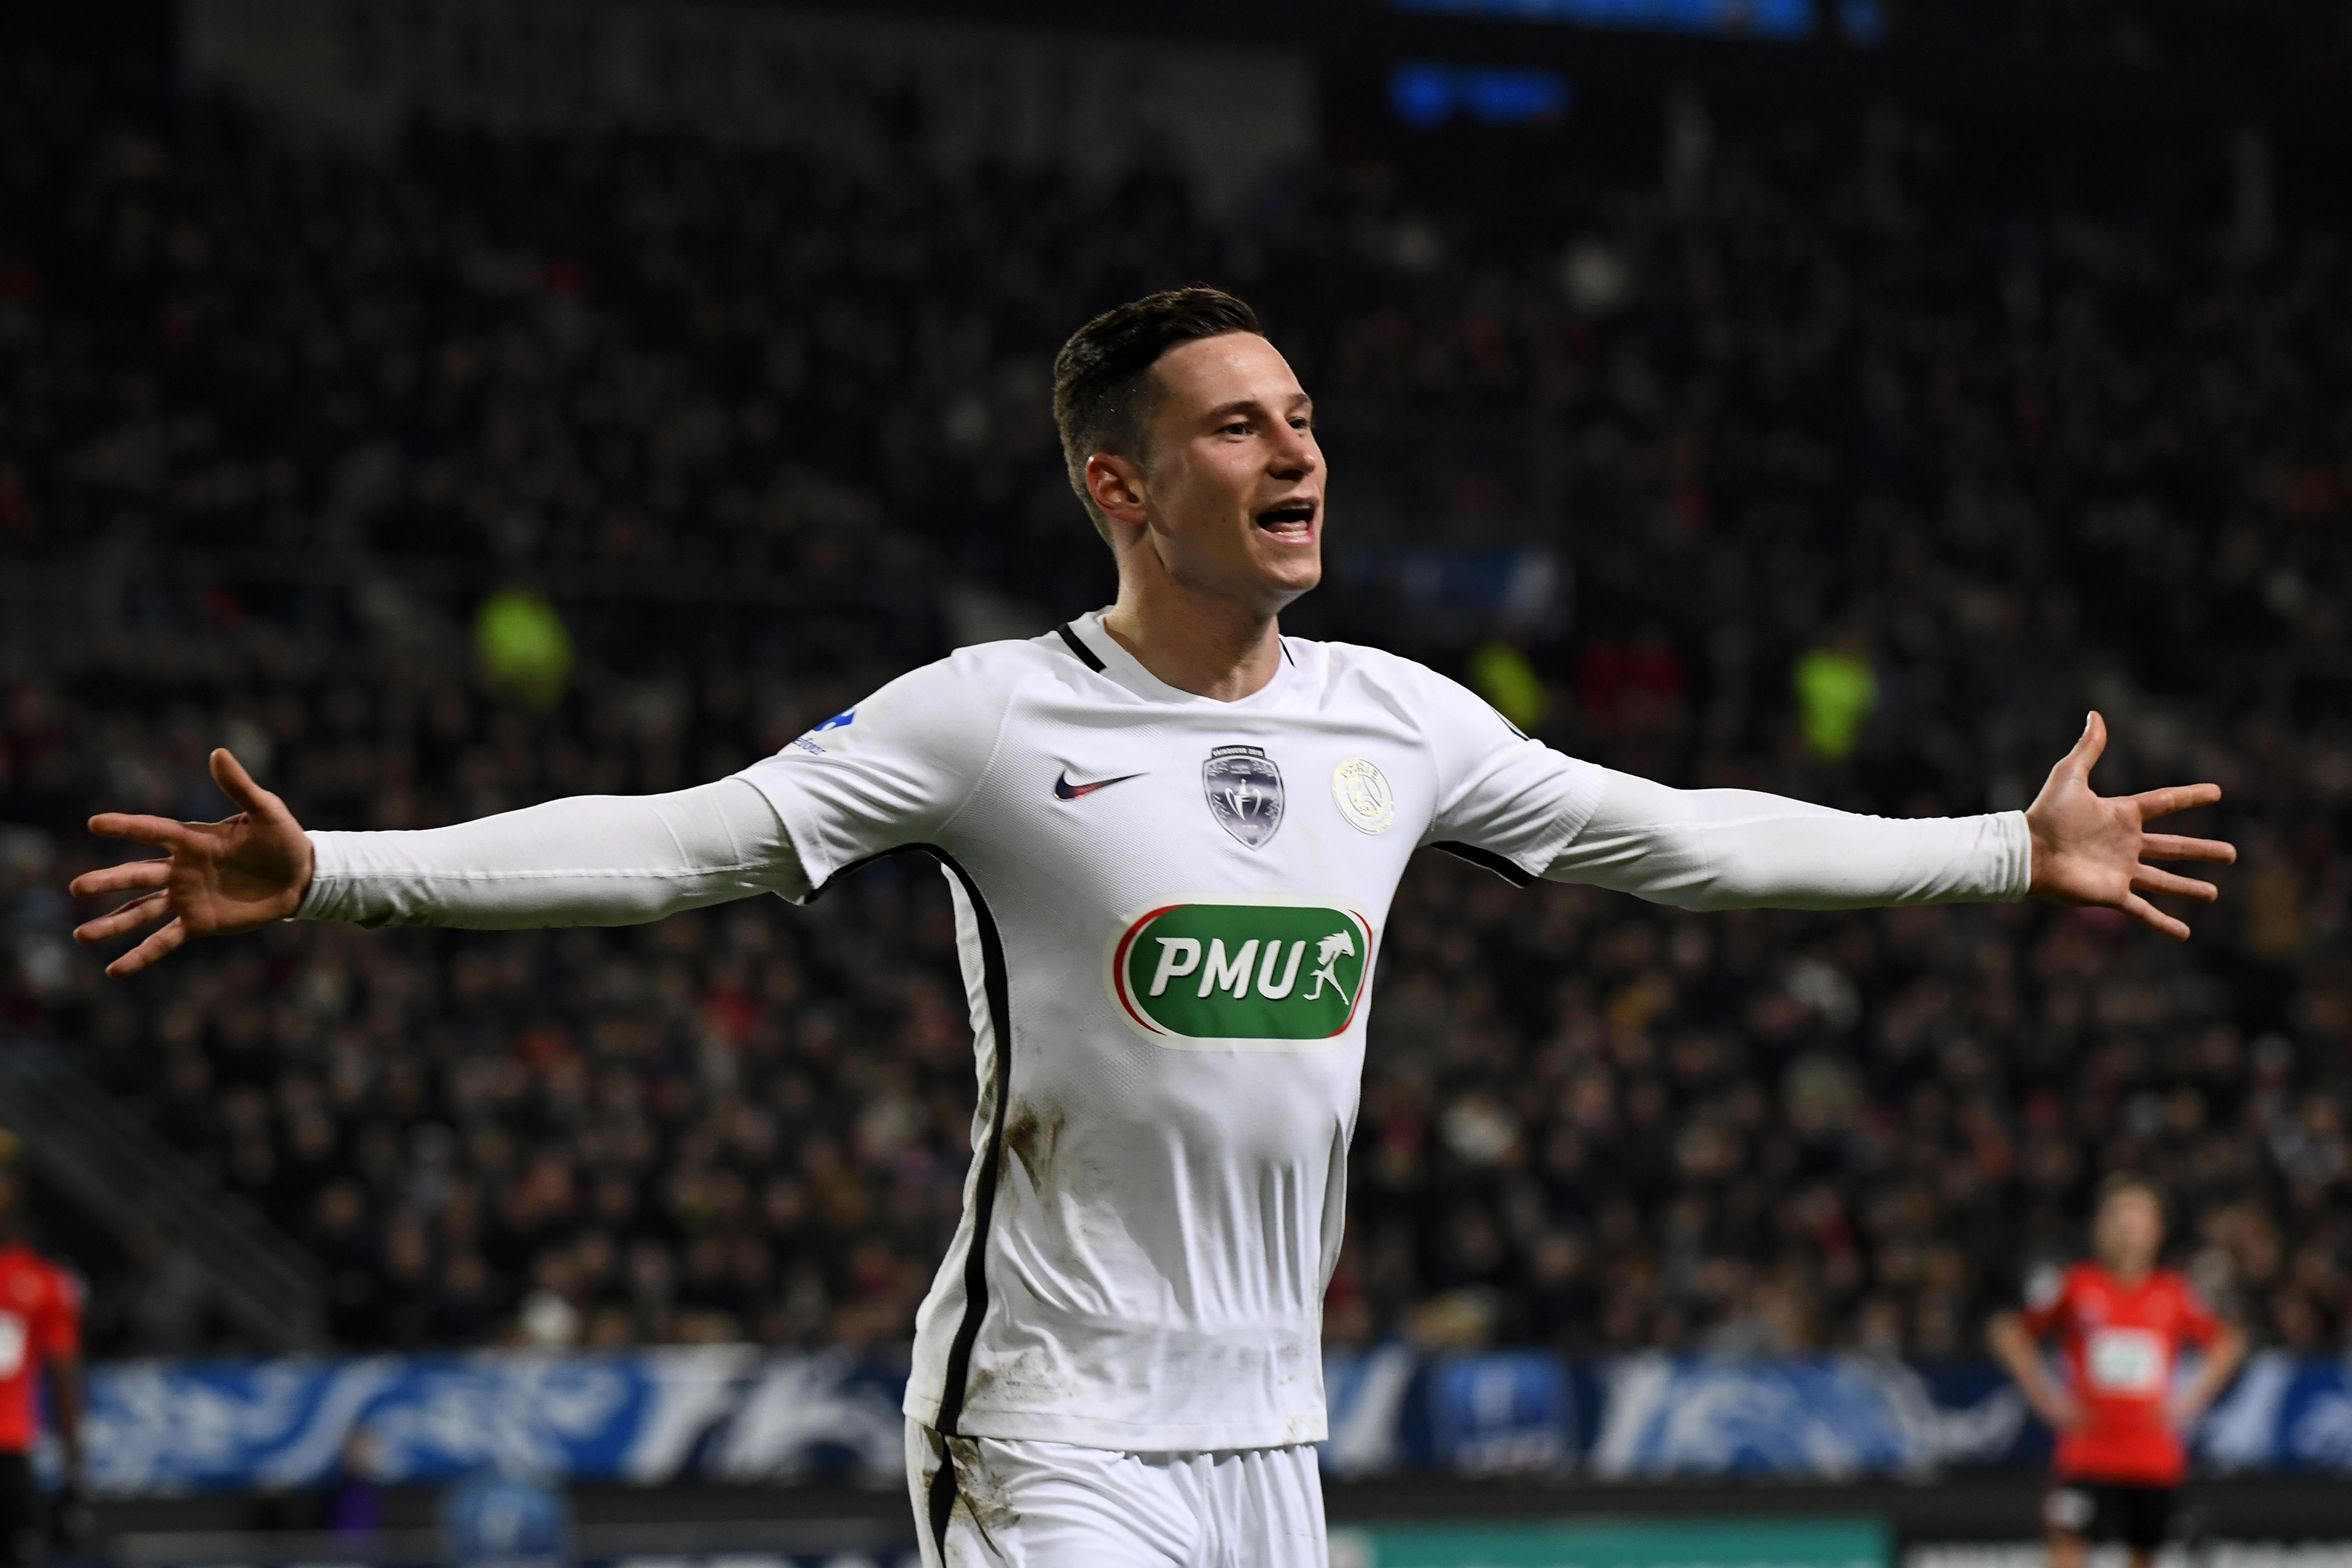 Paris Saint-Germain's German forward Julian Draxler celebrates after scoring a goal during the French Cup football match Rennes against Paris Saint Germain on February 1, 2017 at the Roahzon Park stadium in Rennes, western France. / AFP / DAMIEN MEYER        (Photo credit should read DAMIEN MEYER/AFP/Getty Images)